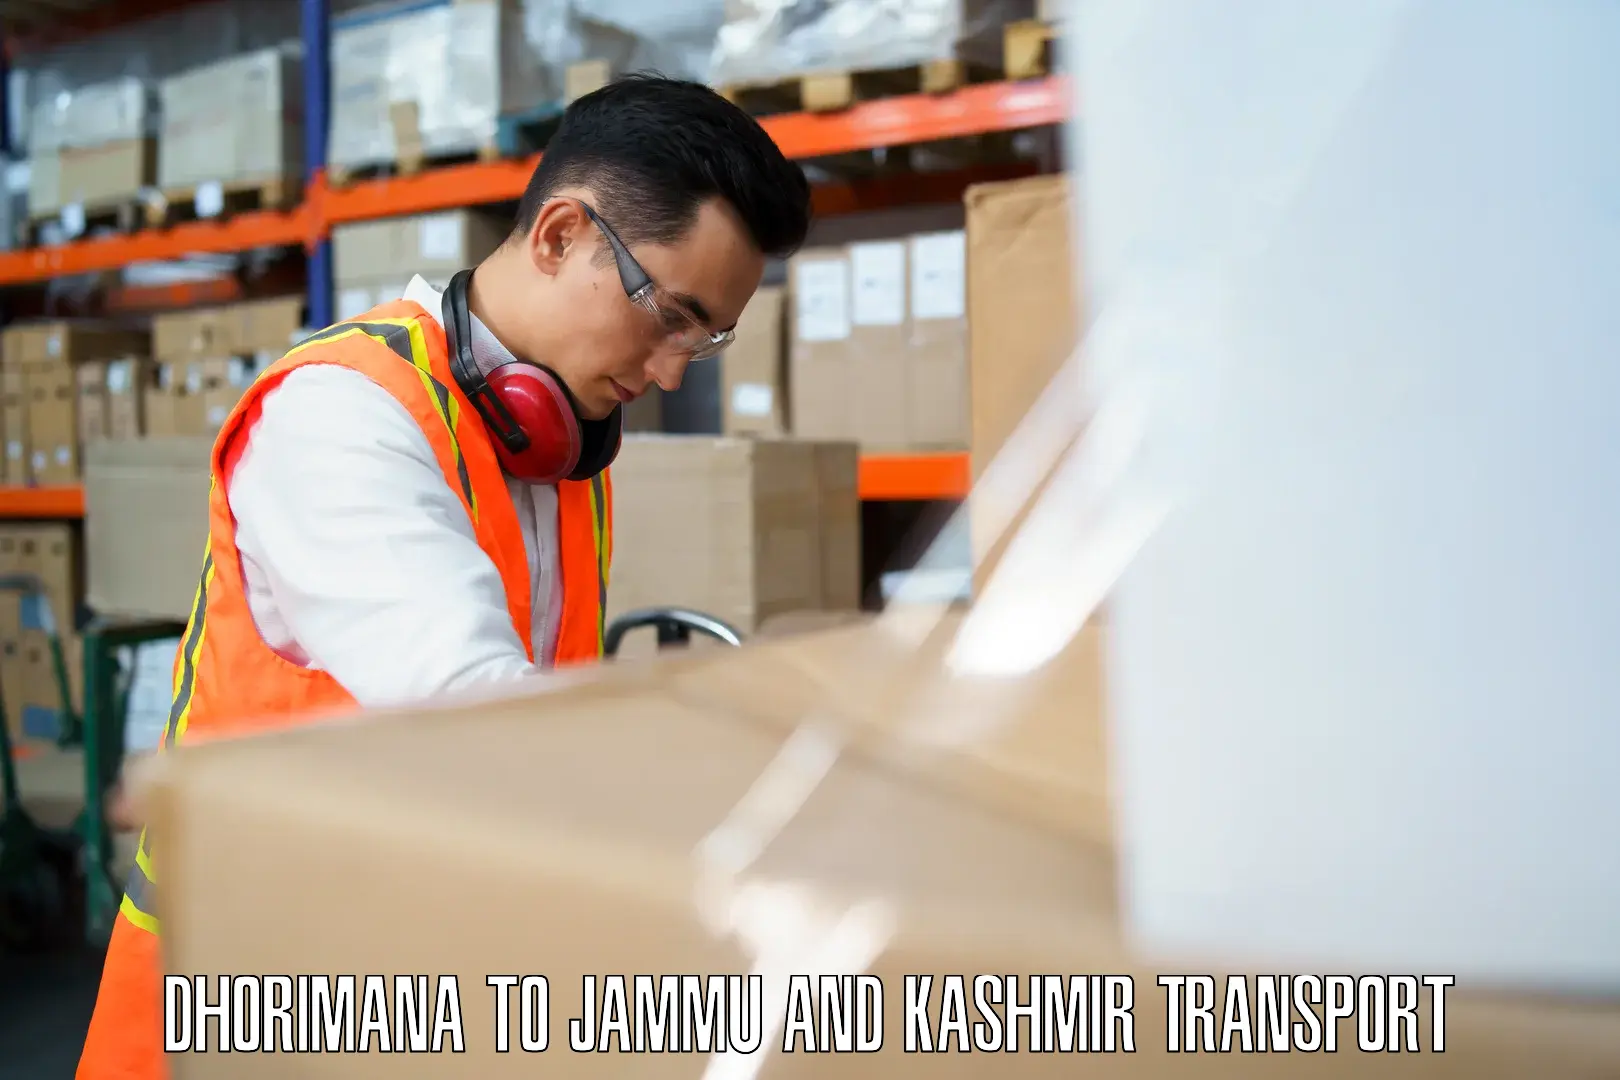 Part load transport service in India Dhorimana to Udhampur